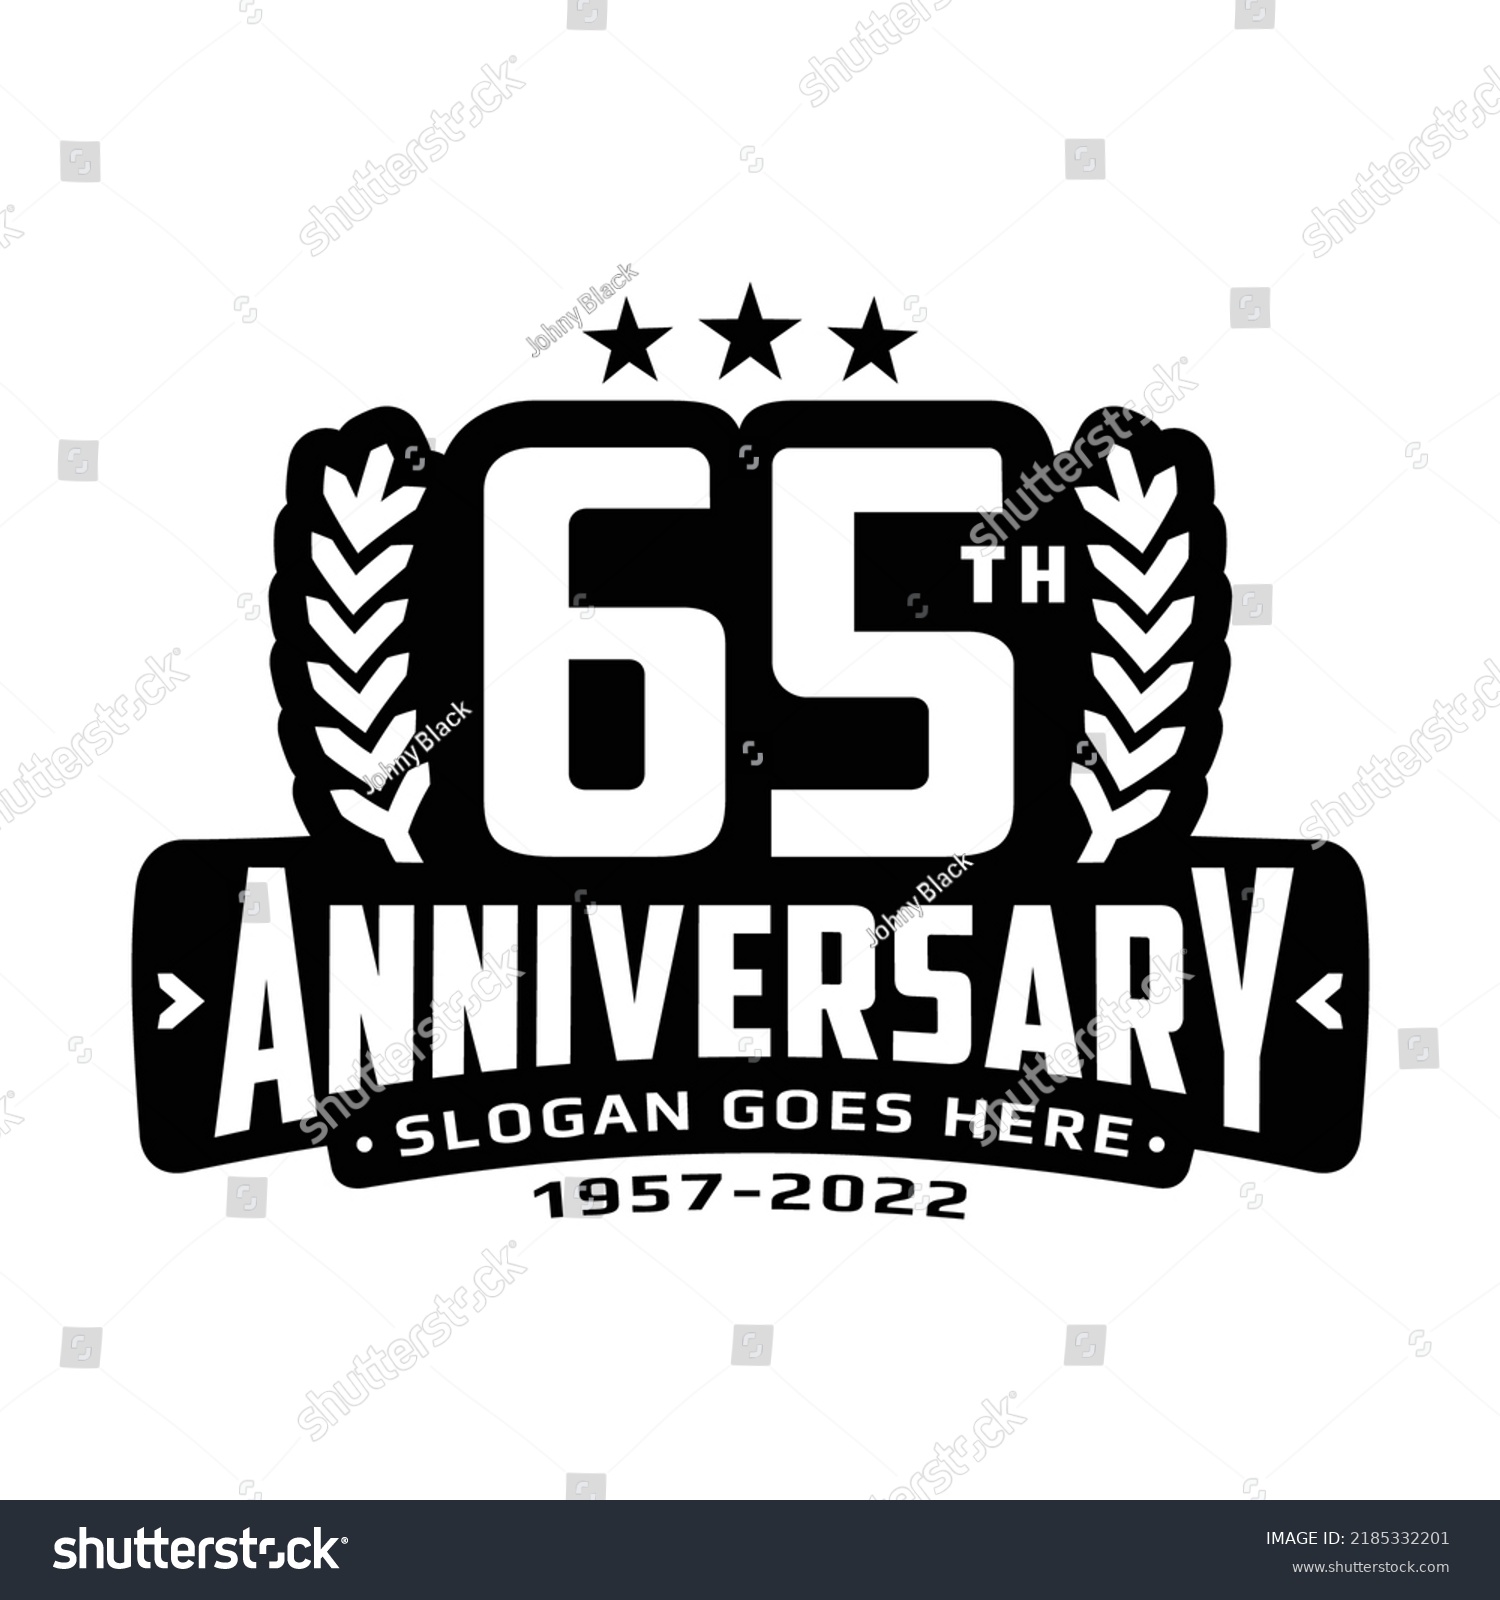 65 years anniversary logo design template. 65th - Royalty Free Stock ...